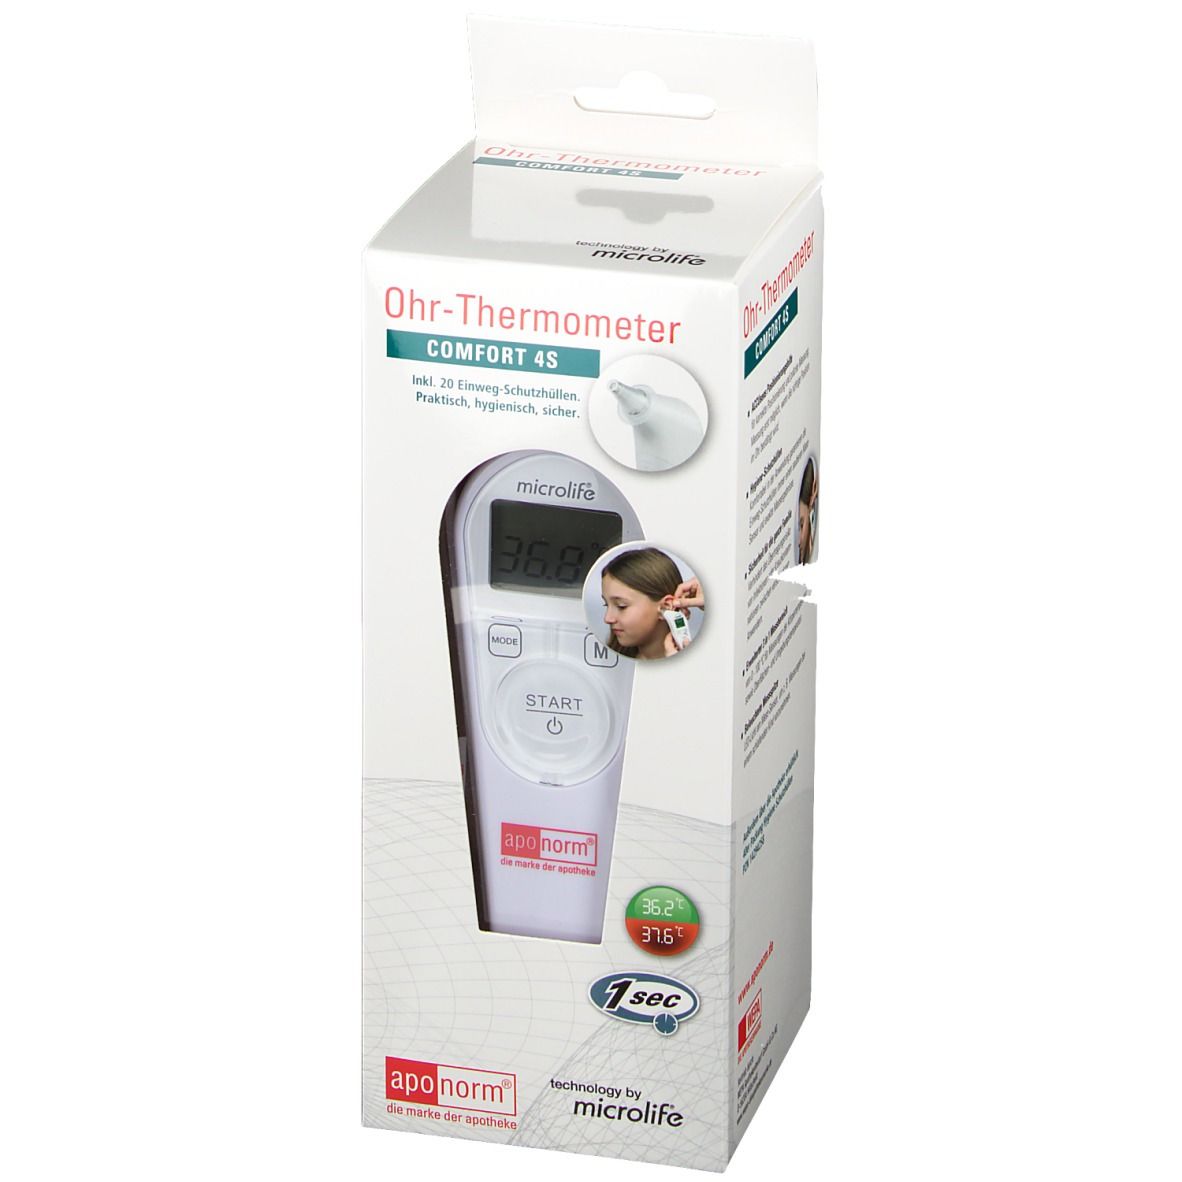 aponorm ® Ohrthermometer Comfort 4S